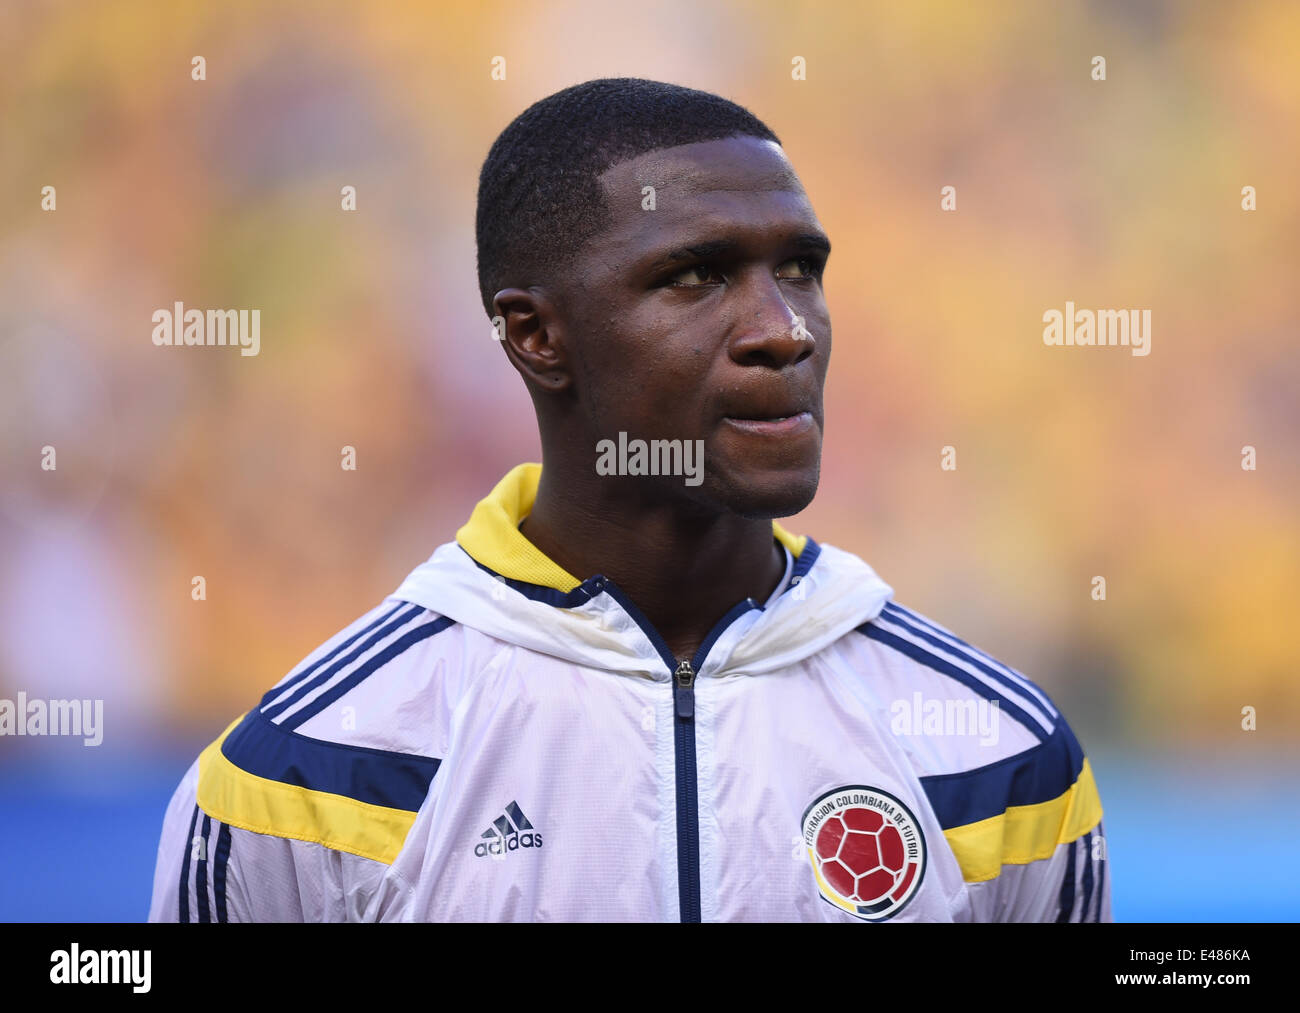 Fortaleza, Brazil. 04th July, 2014. Cristian Zapata of Colombia seen during the FIFA World Cup 2014 quarter final match soccer between Brazil and Colombia at the Estadio Castelao in Fortaleza, Brazil, 04 July 2014. Photo: Marius Becker/dpa/Alamy Live News Stock Photo